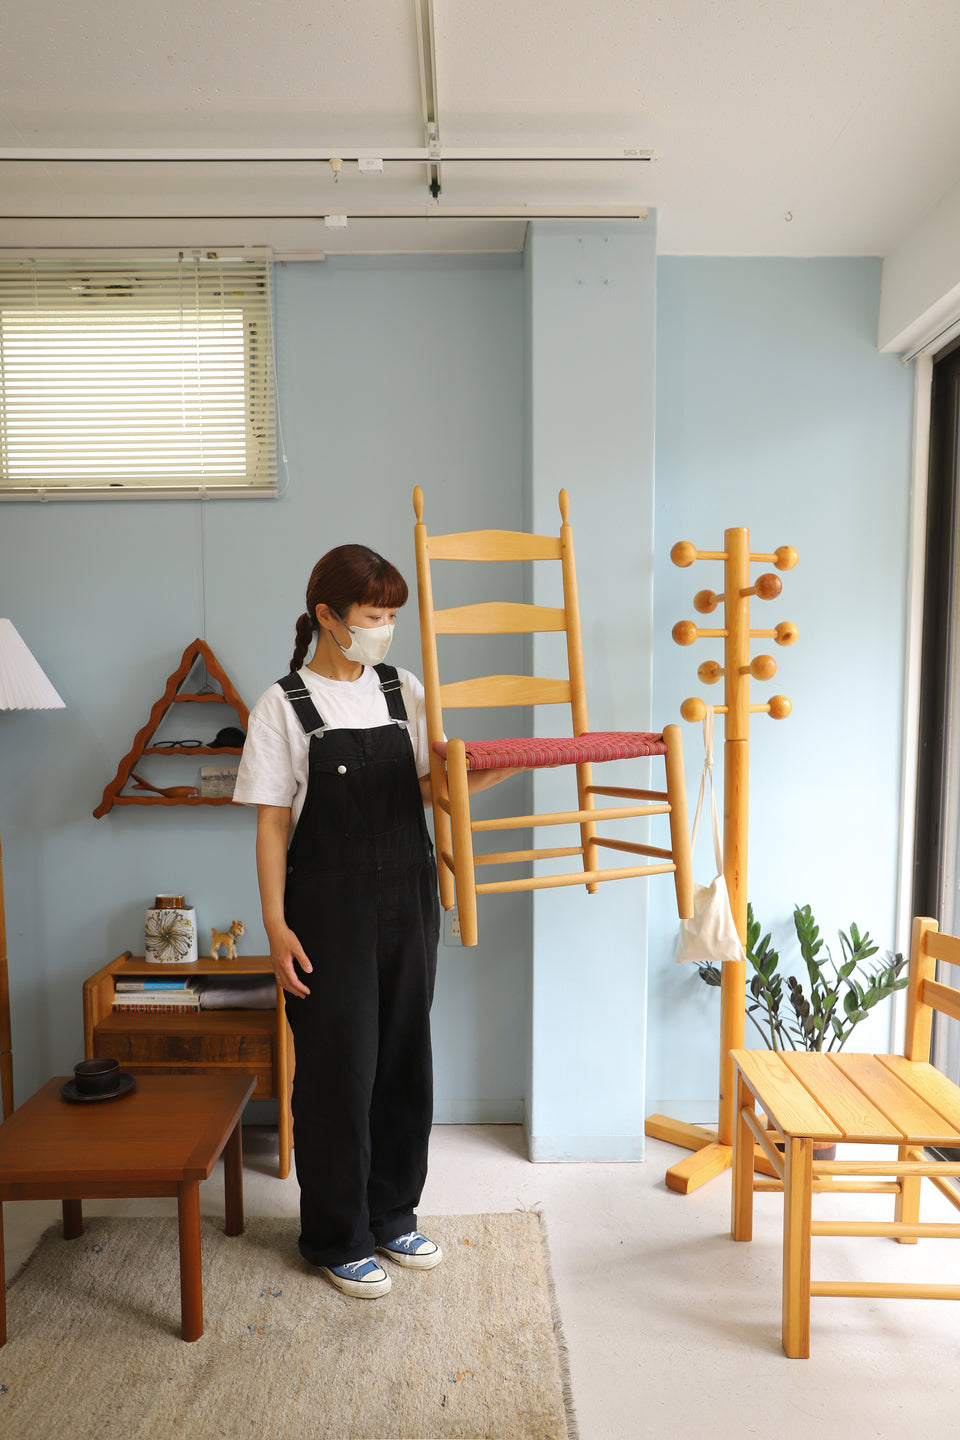 Unoh Furniture Workshop Shaker Style Chair/宇納家具工房 シェーカースタイル チェア 椅子